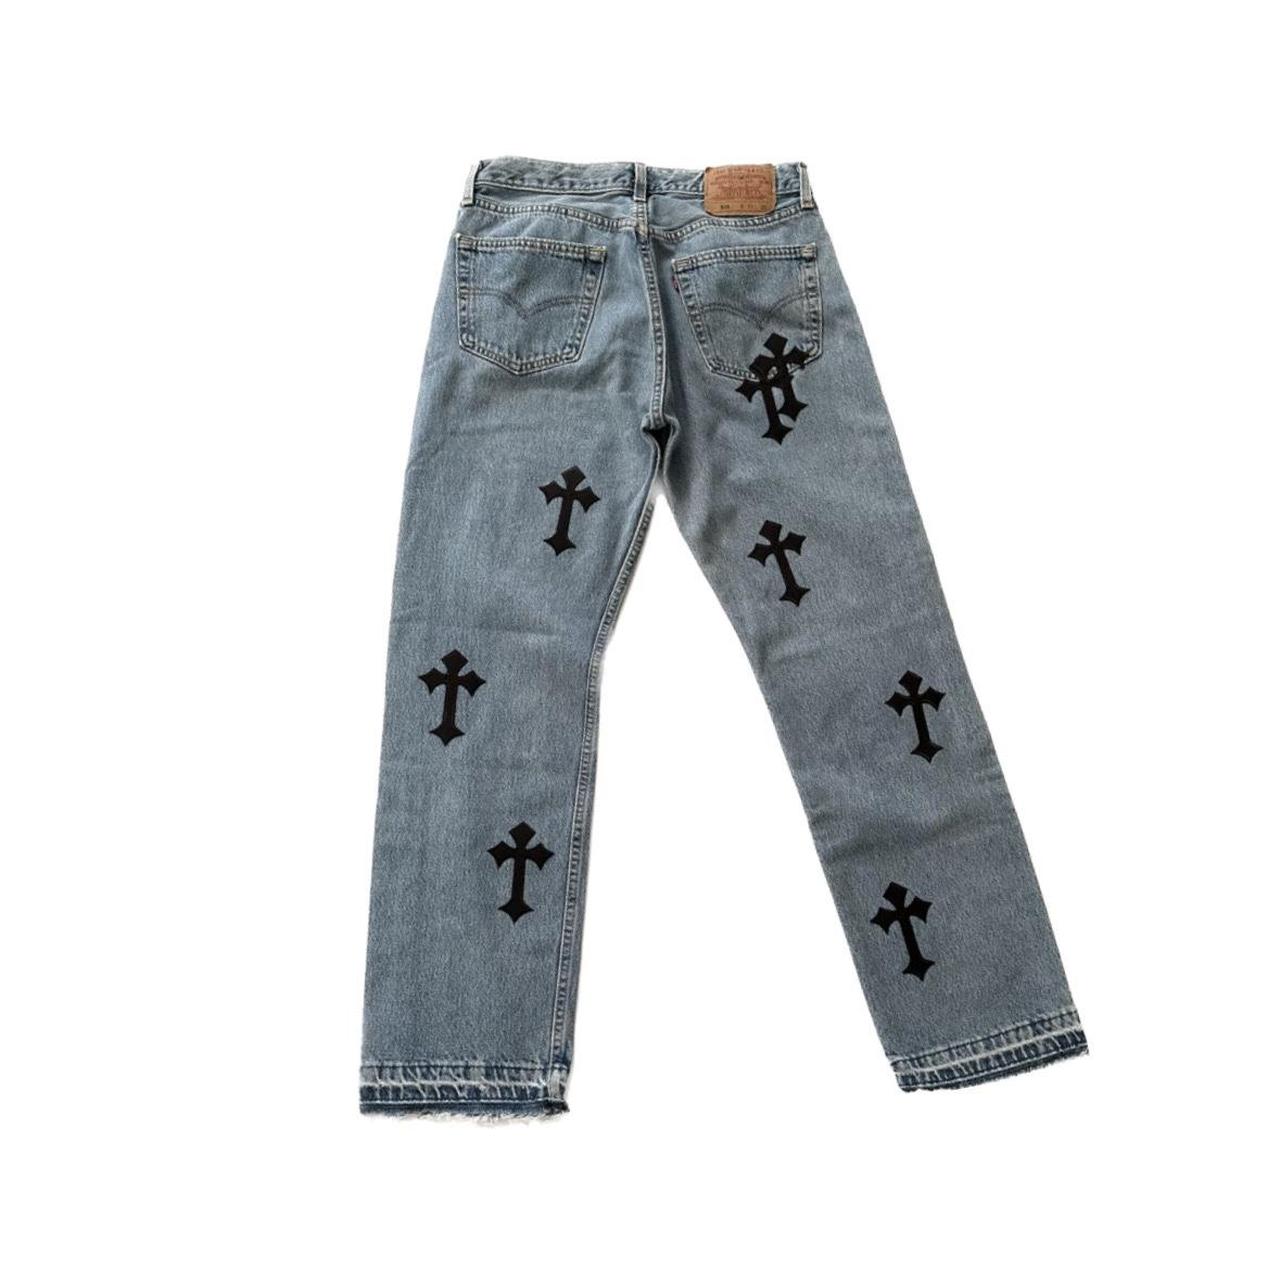 Chrome Hearts Inspired Levi's 501 Cross Patch Jeans. - Depop